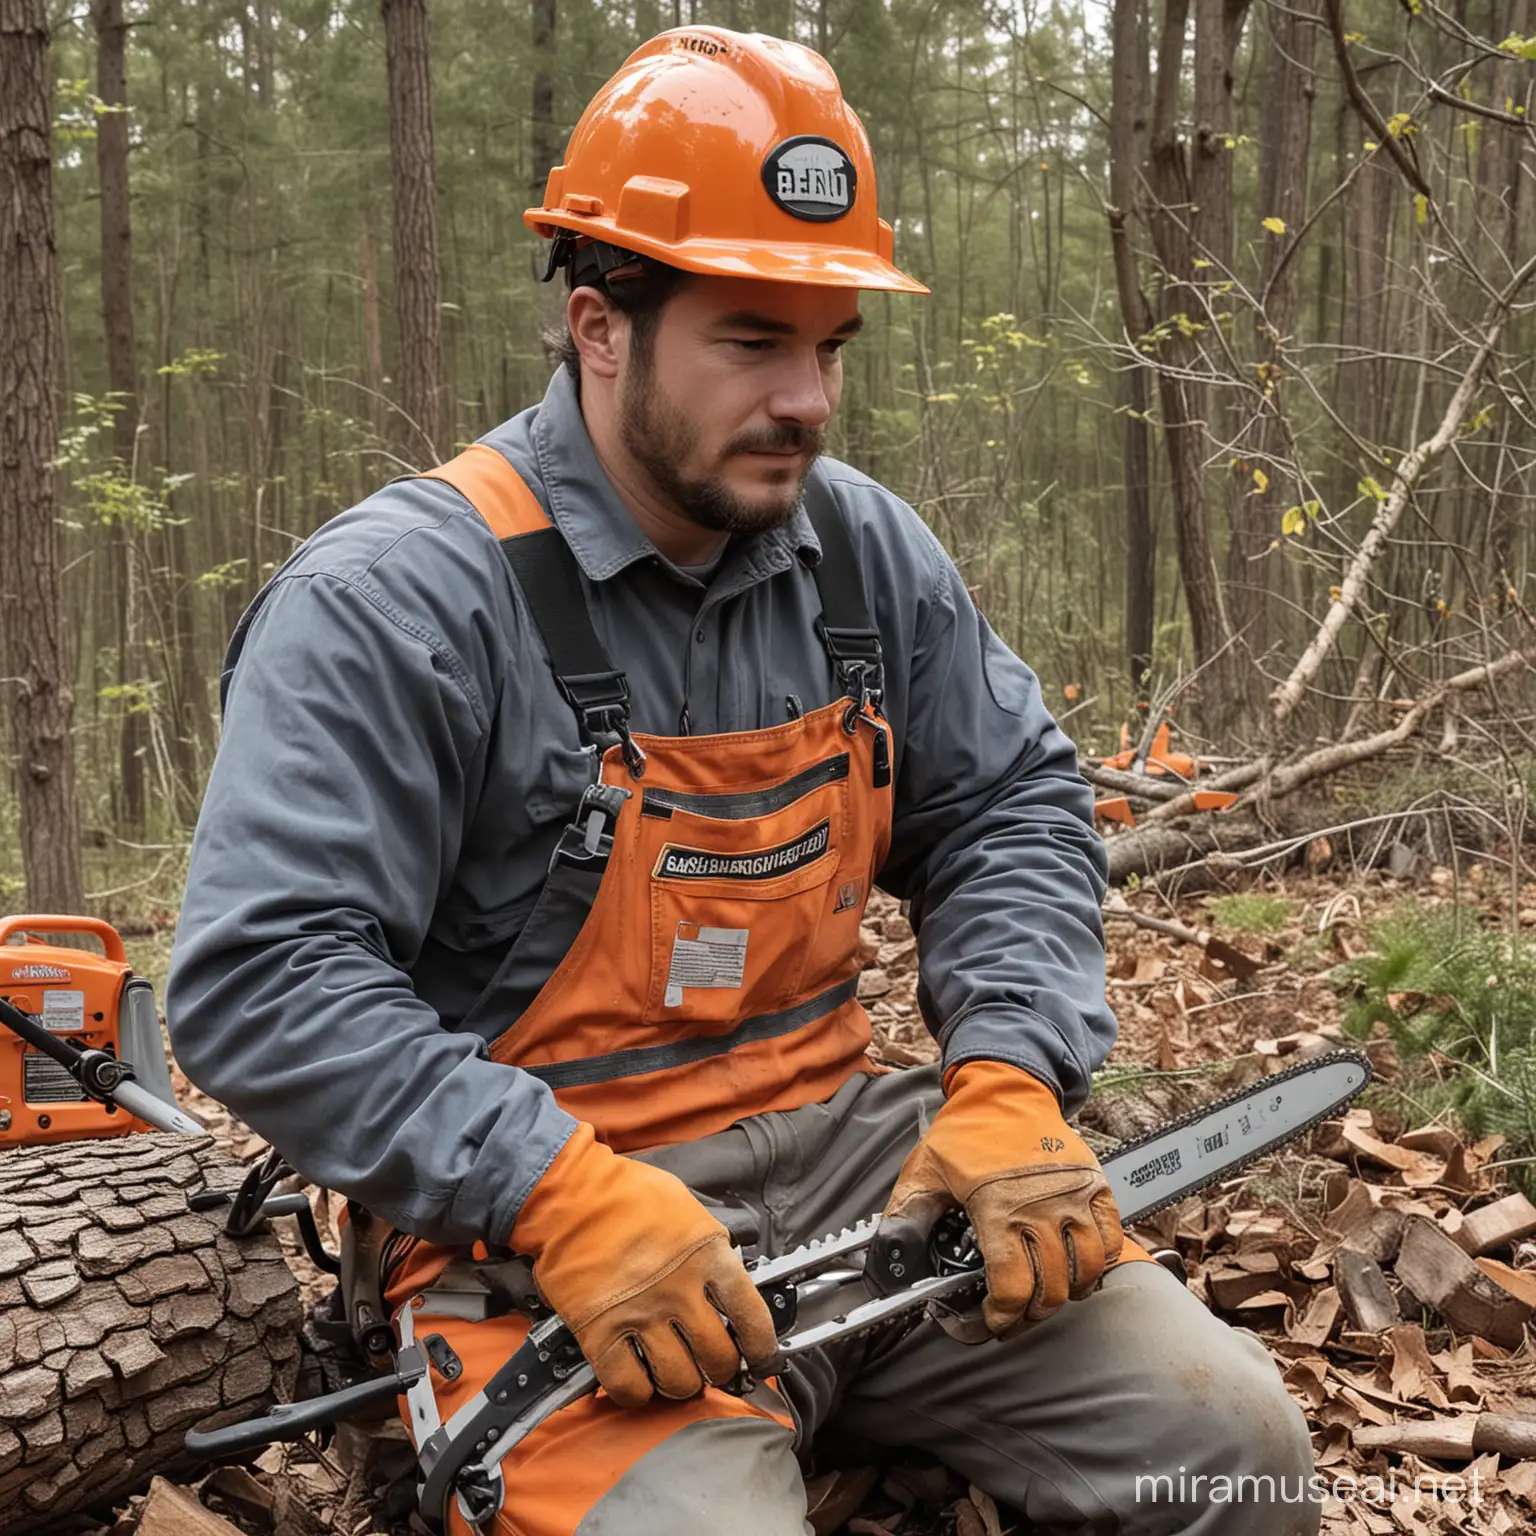 Generate the photo of a chainsaw operator sitting with a bent and twisted back, two hands below shoulder level holding the machine.